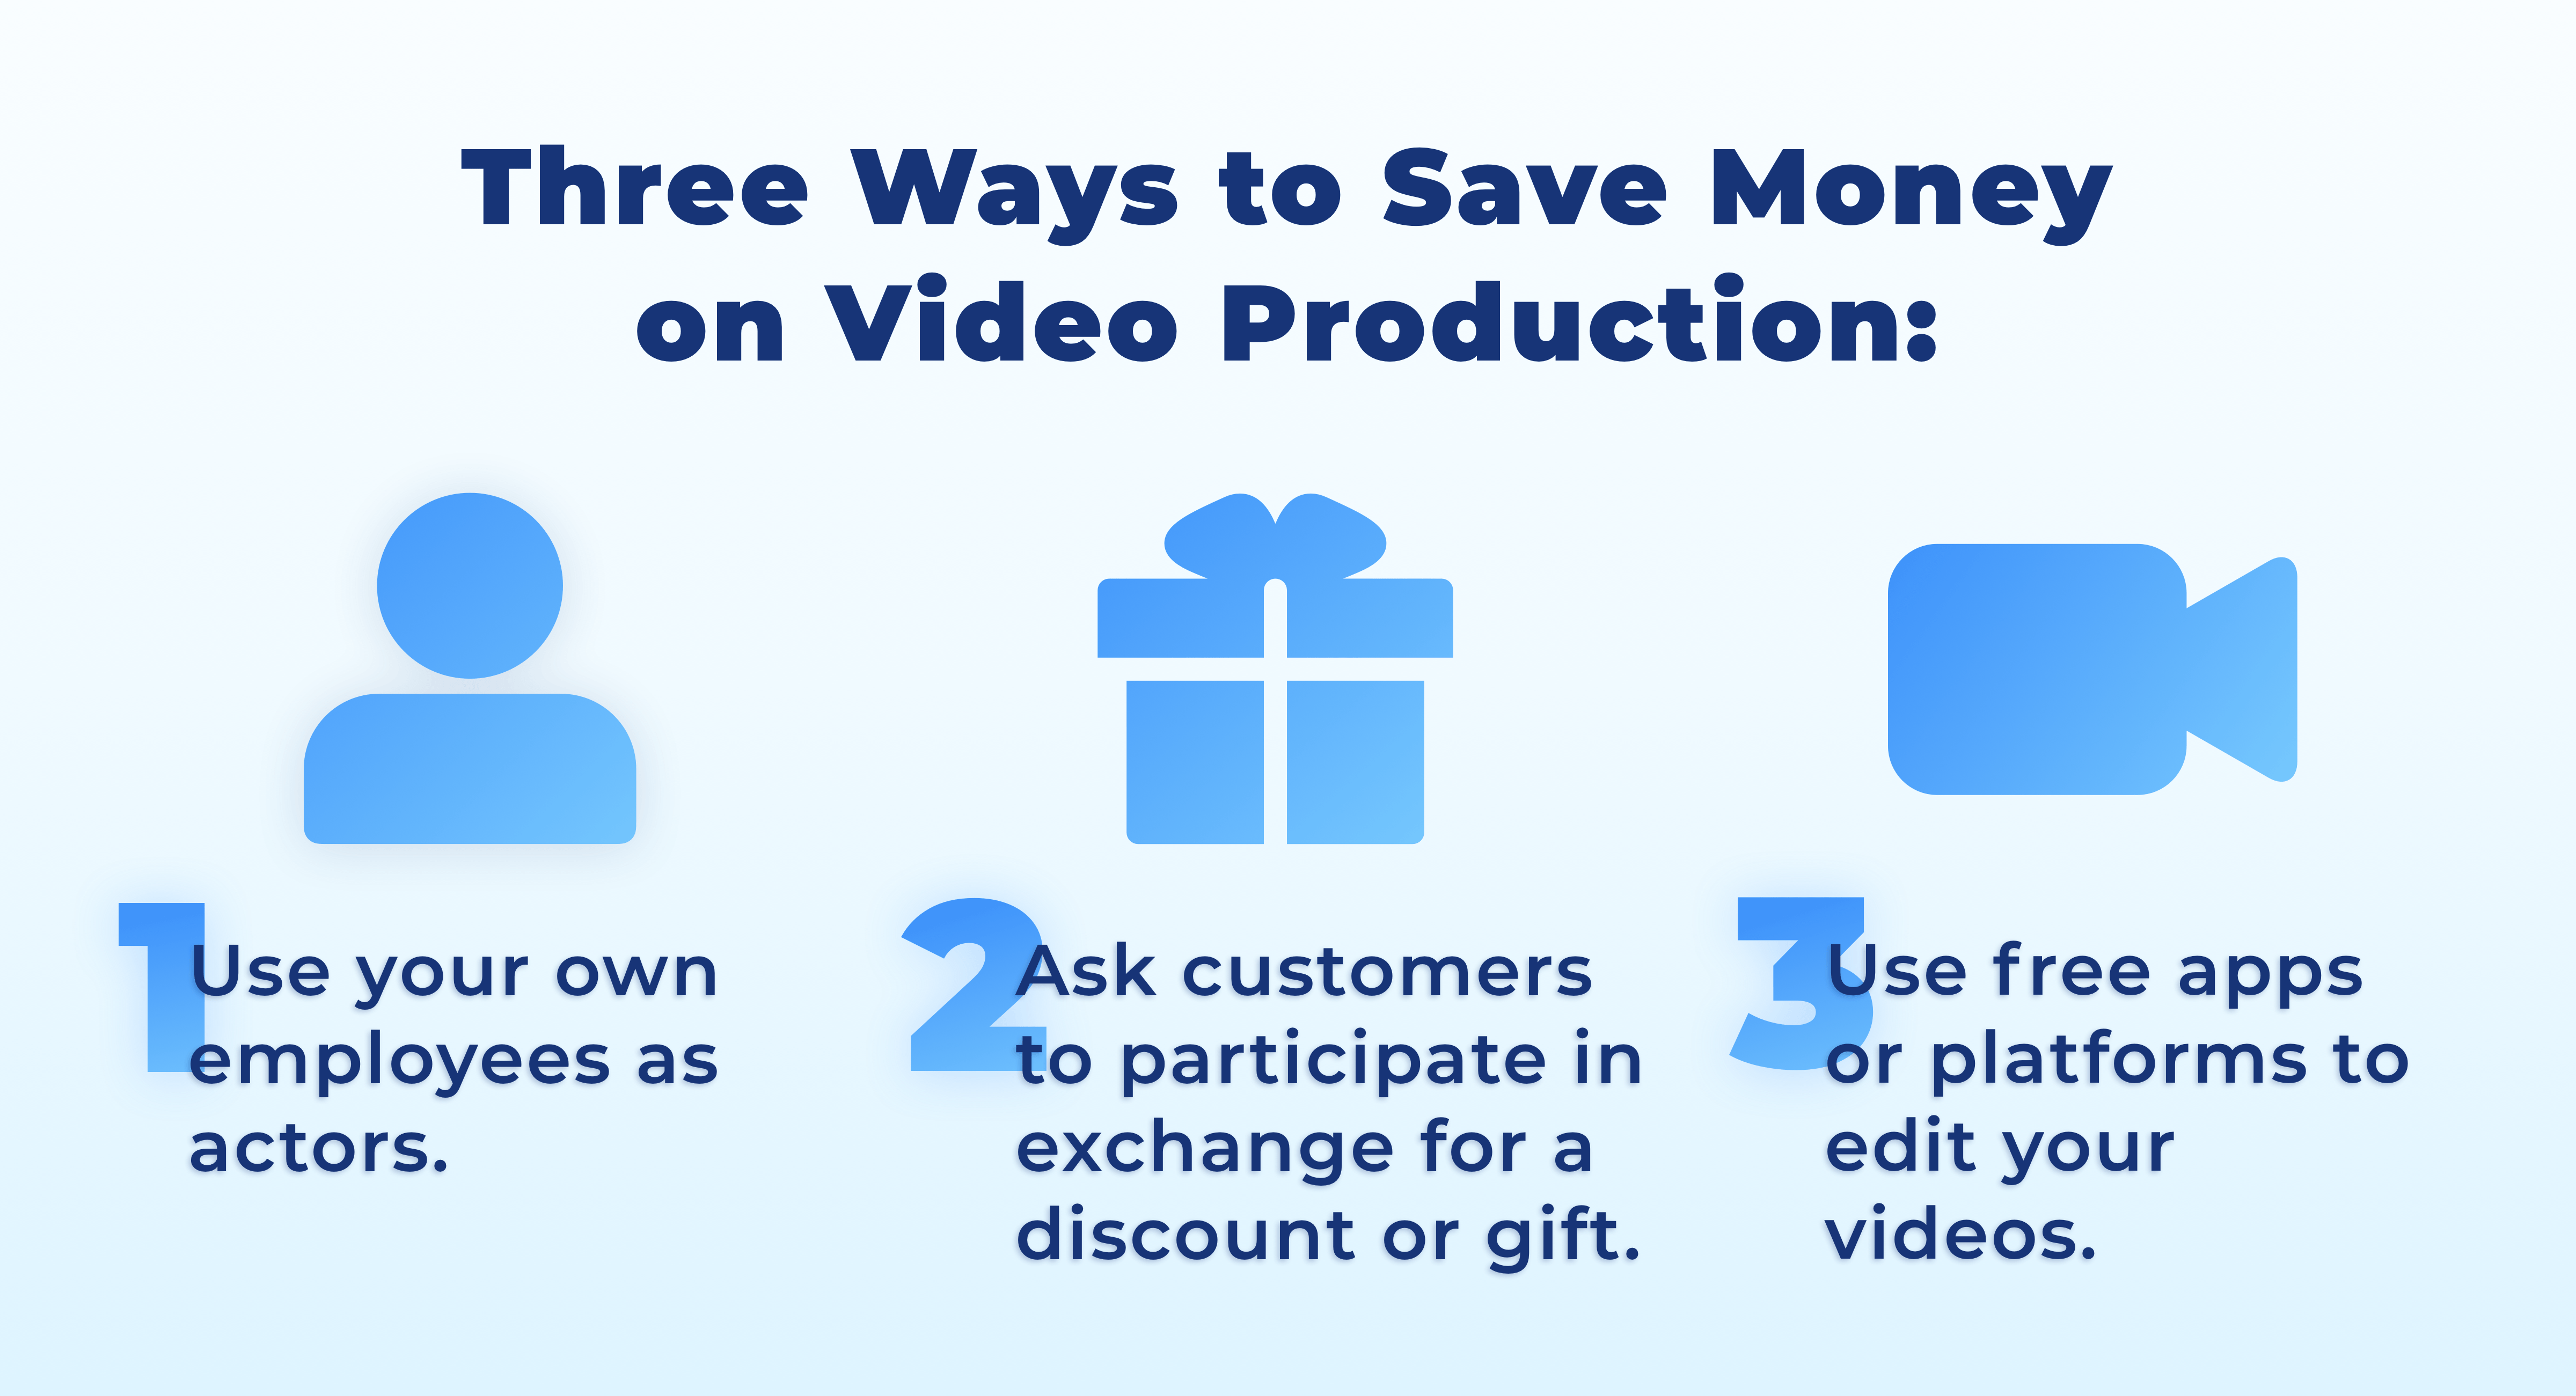 Three Ways to Save Money on Video Productions